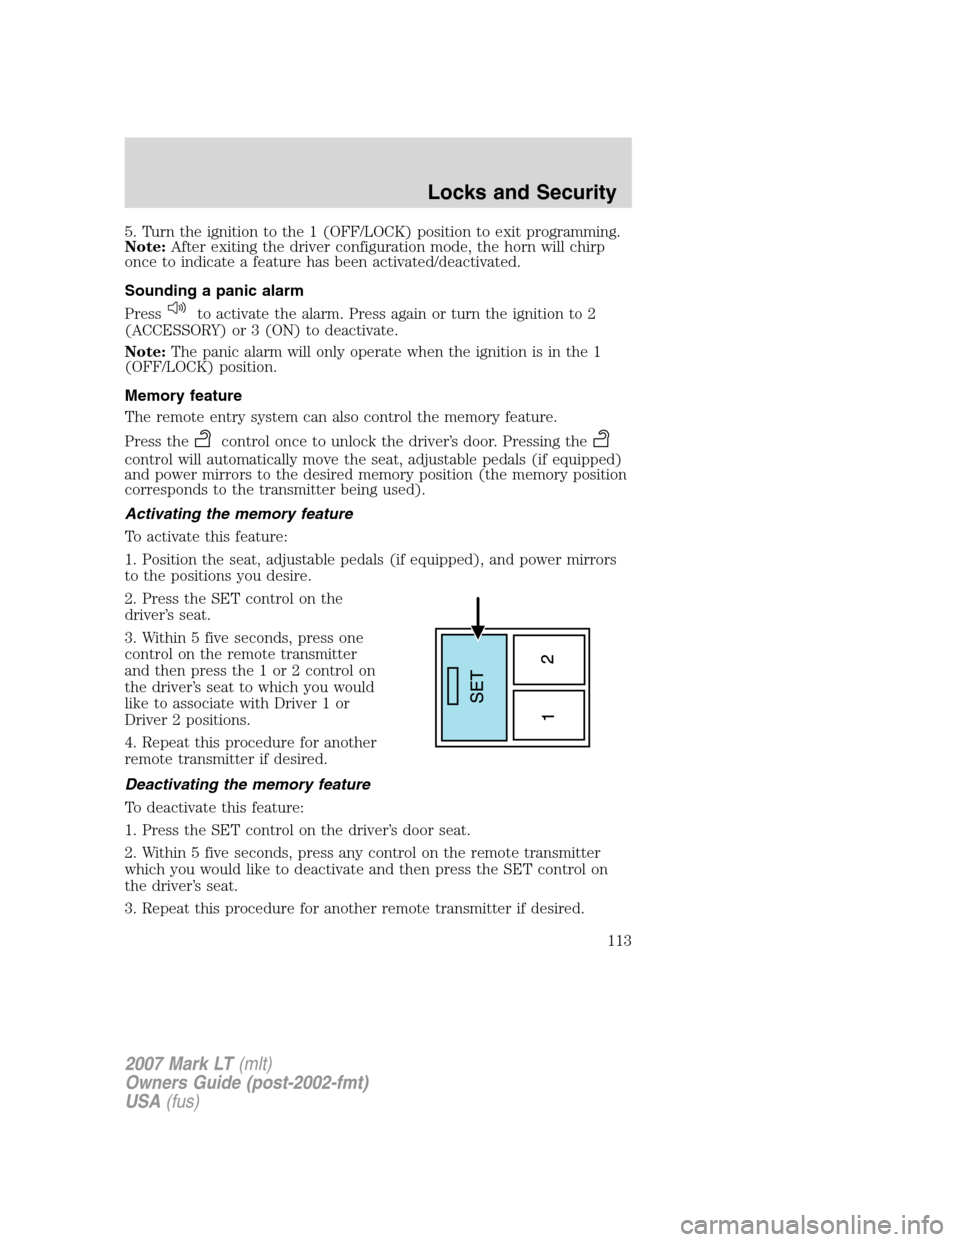 LINCOLN MARK LT 2007  Owners Manual 5. Turn the ignition to the 1 (OFF/LOCK) position to exit programming.
Note:After exiting the driver configuration mode, the horn will chirp
once to indicate a feature has been activated/deactivated.
